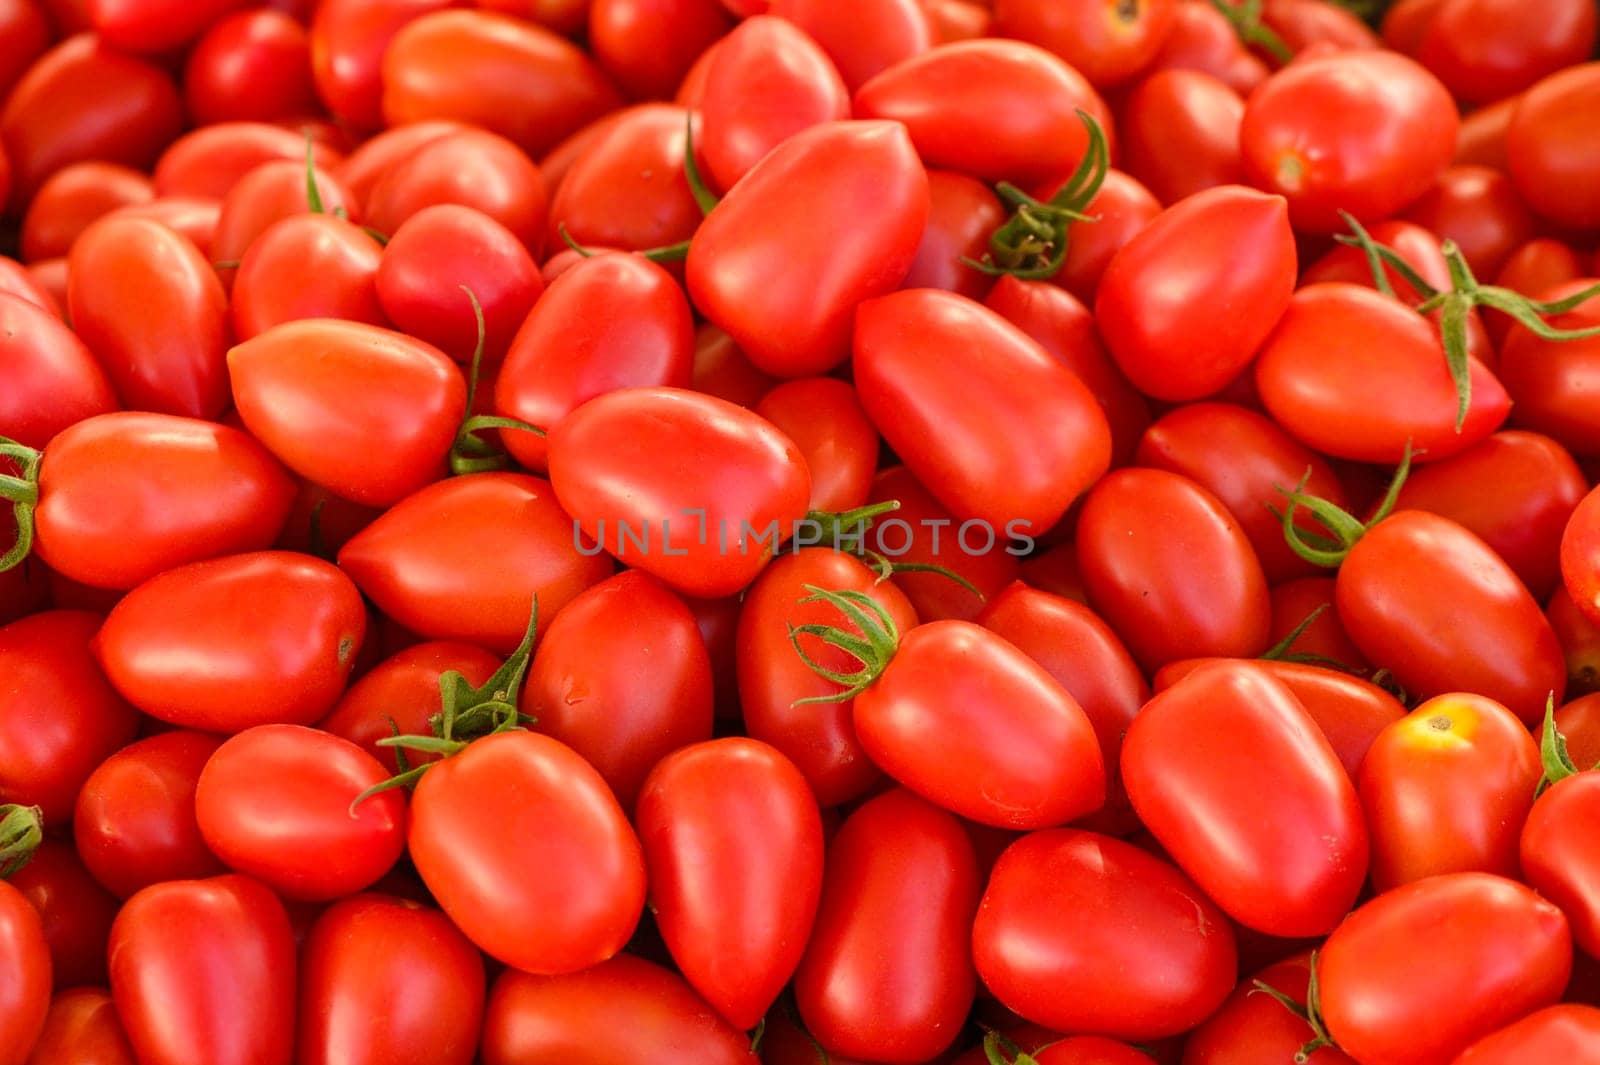 juicy tomatoes at the local market